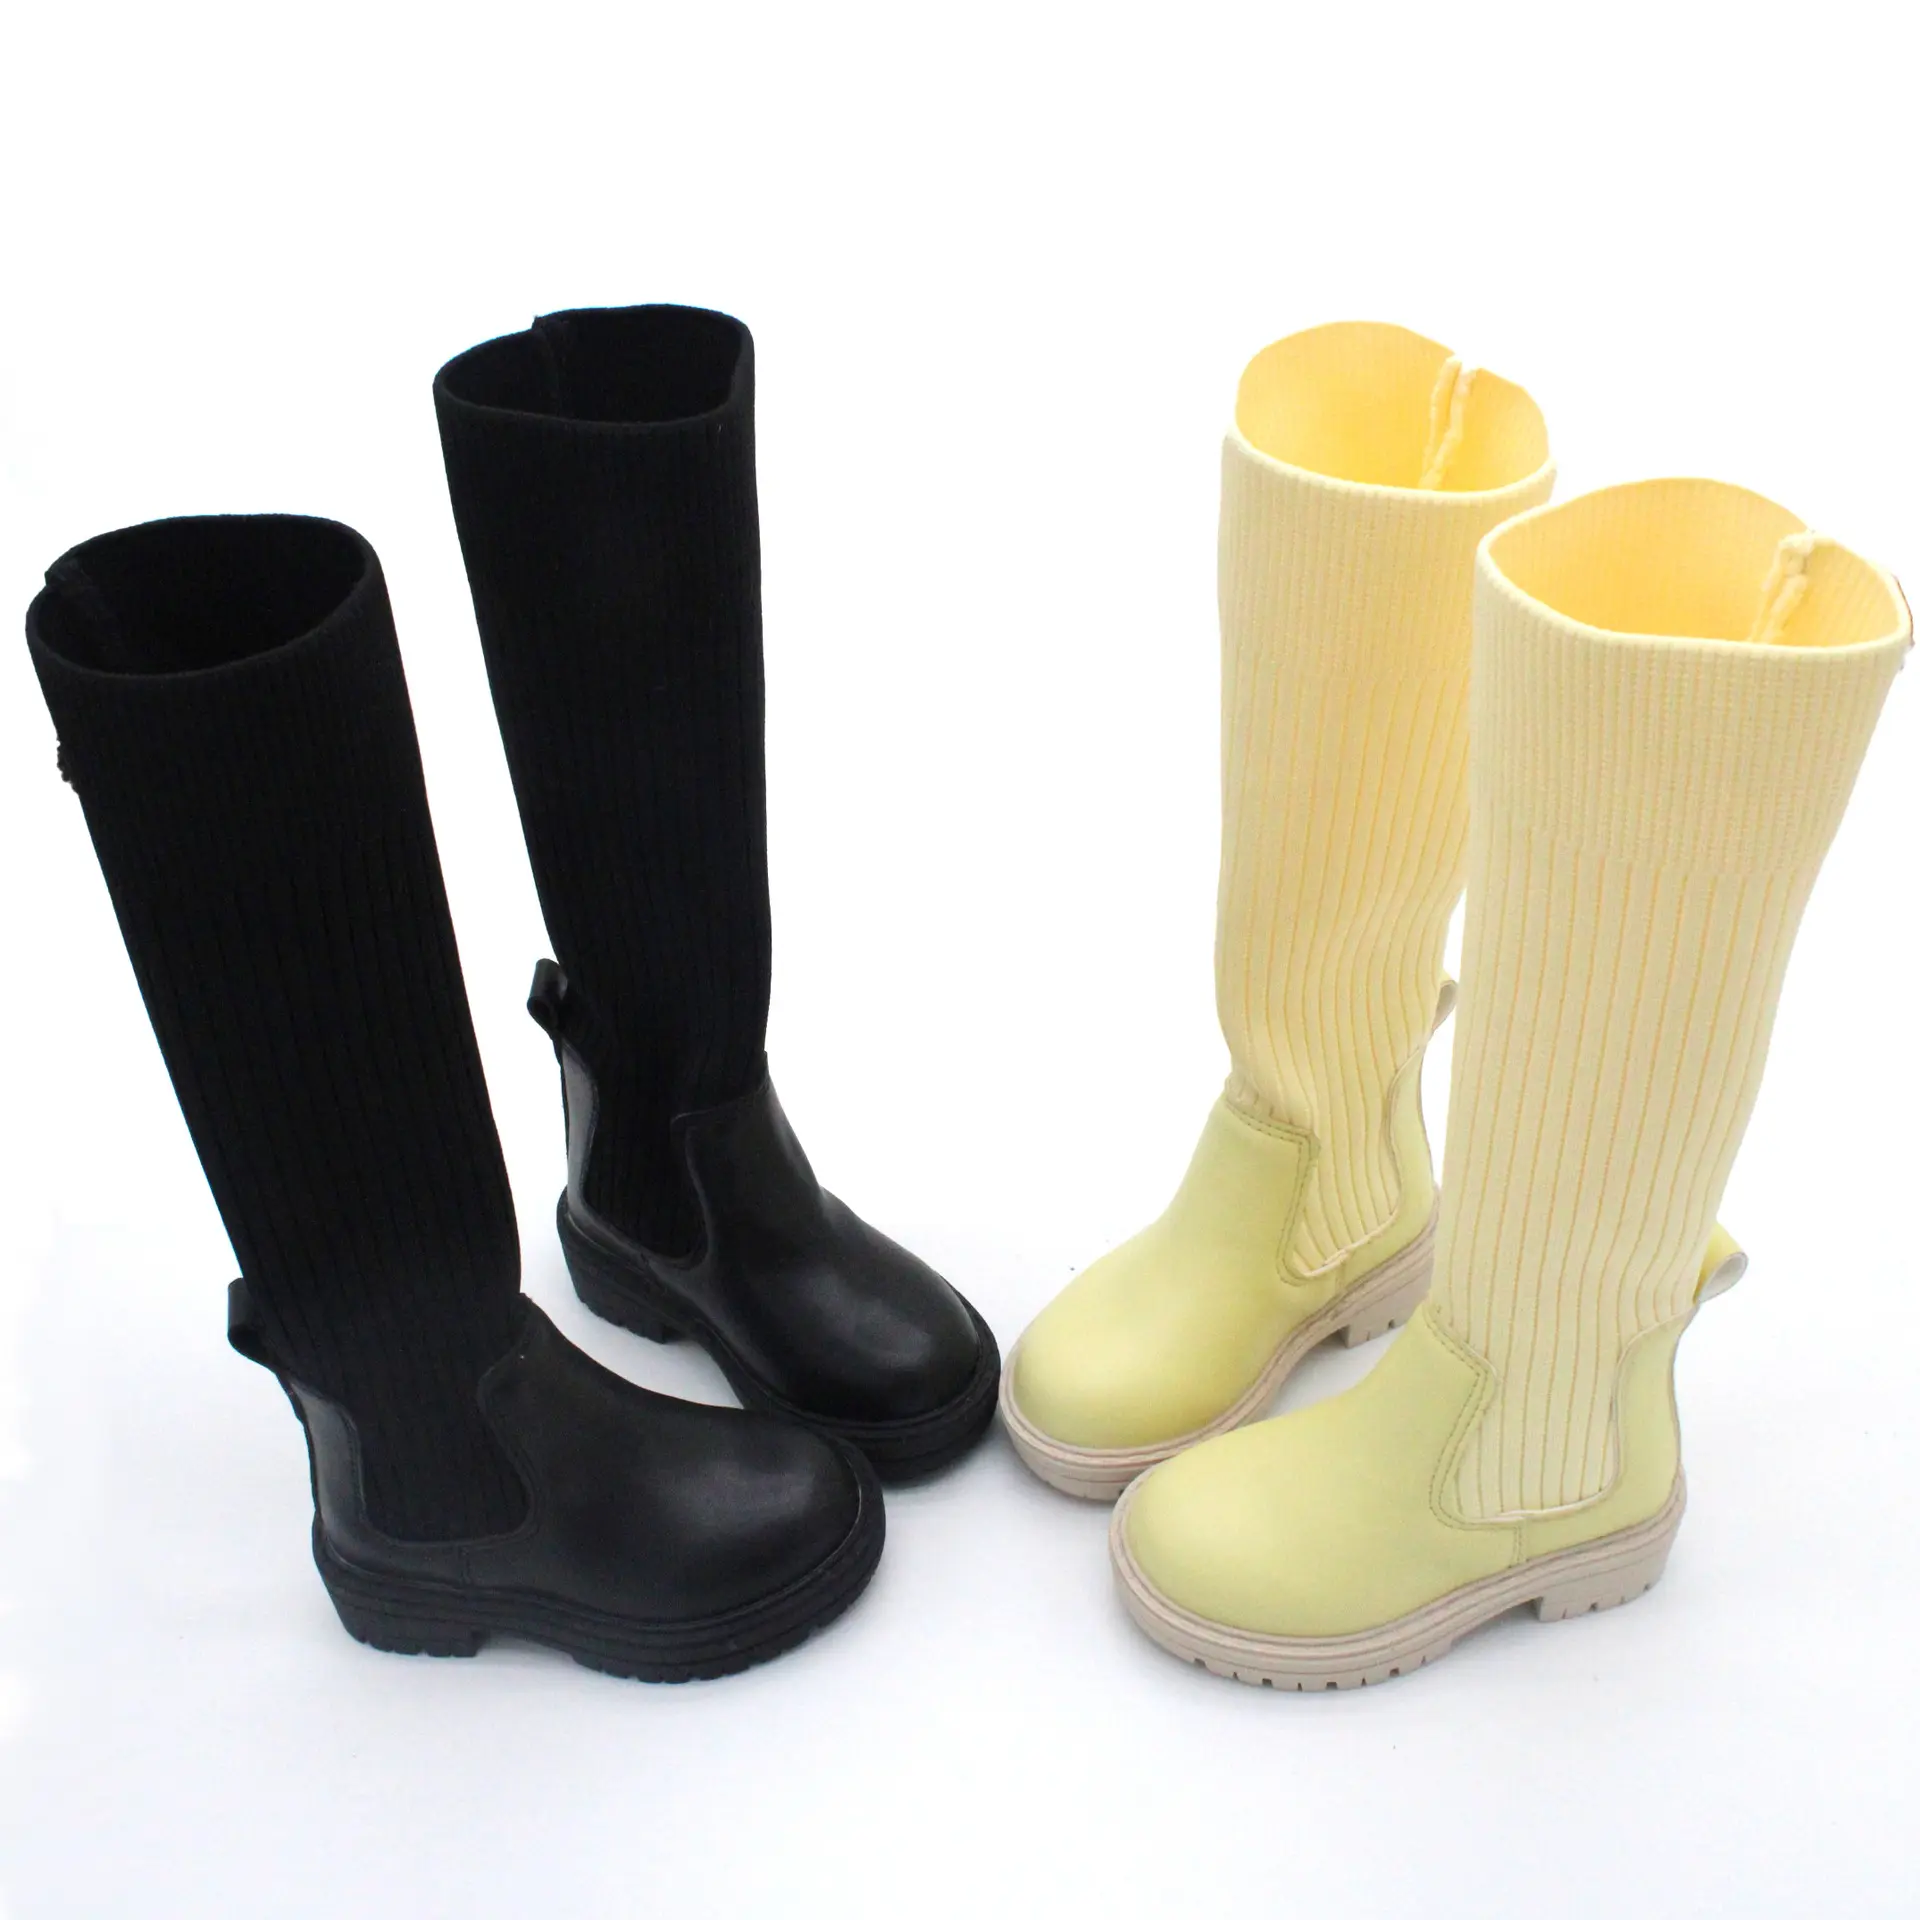 2022 Autumn Kids Neon Items Long Boots Knitted Boots Elastic Socks High Boots Kids Over The Knee Baby Girl Trendy Shoes